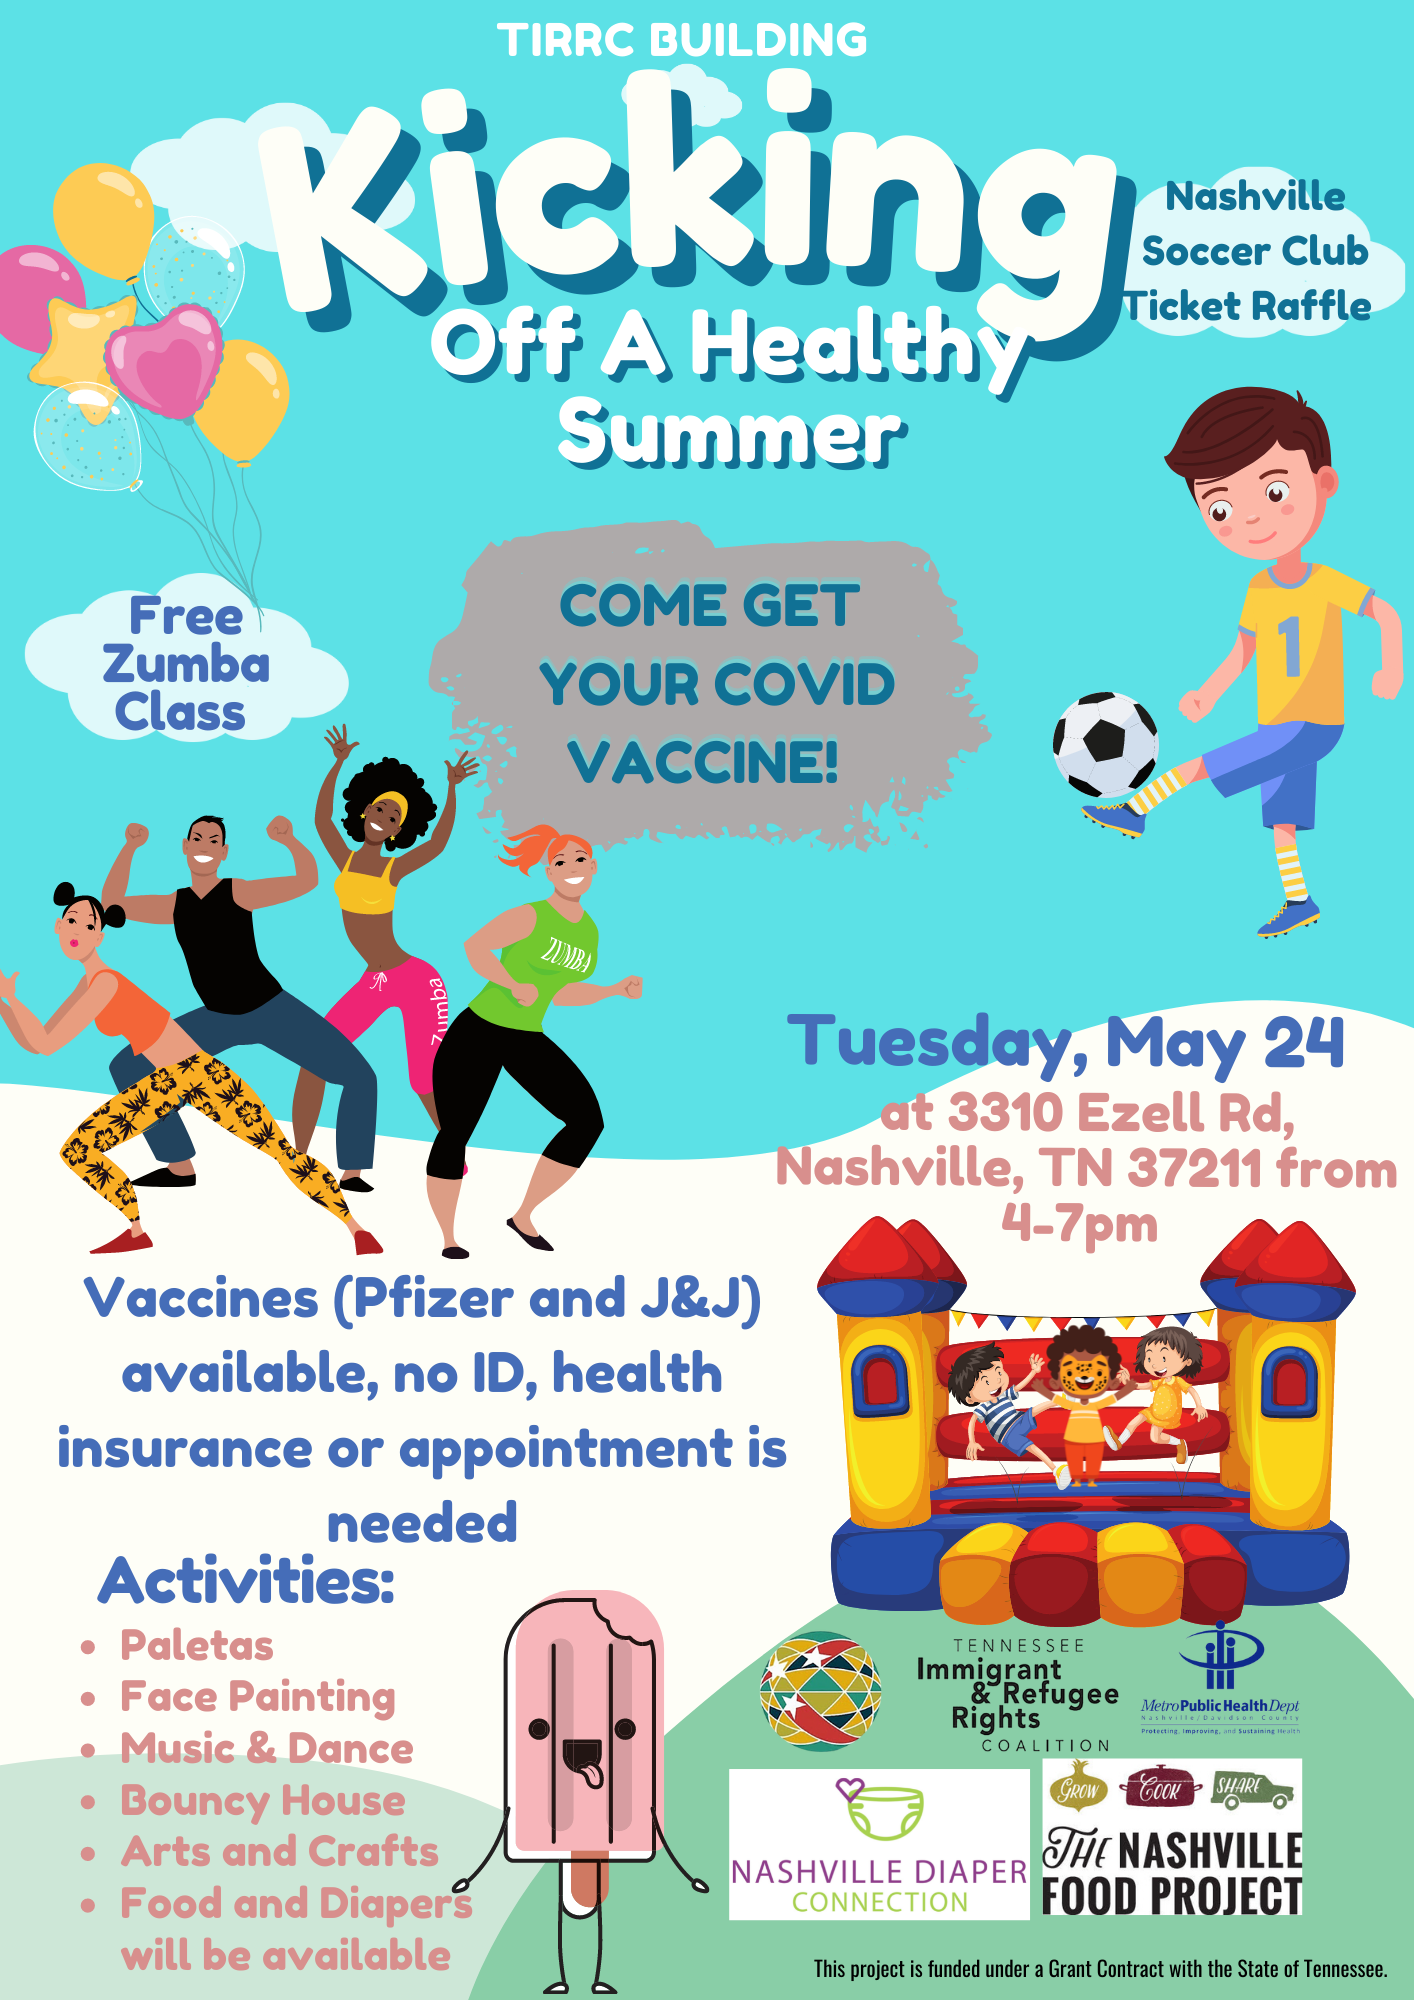 Kicking Off A Healthy Summer With Tirrc